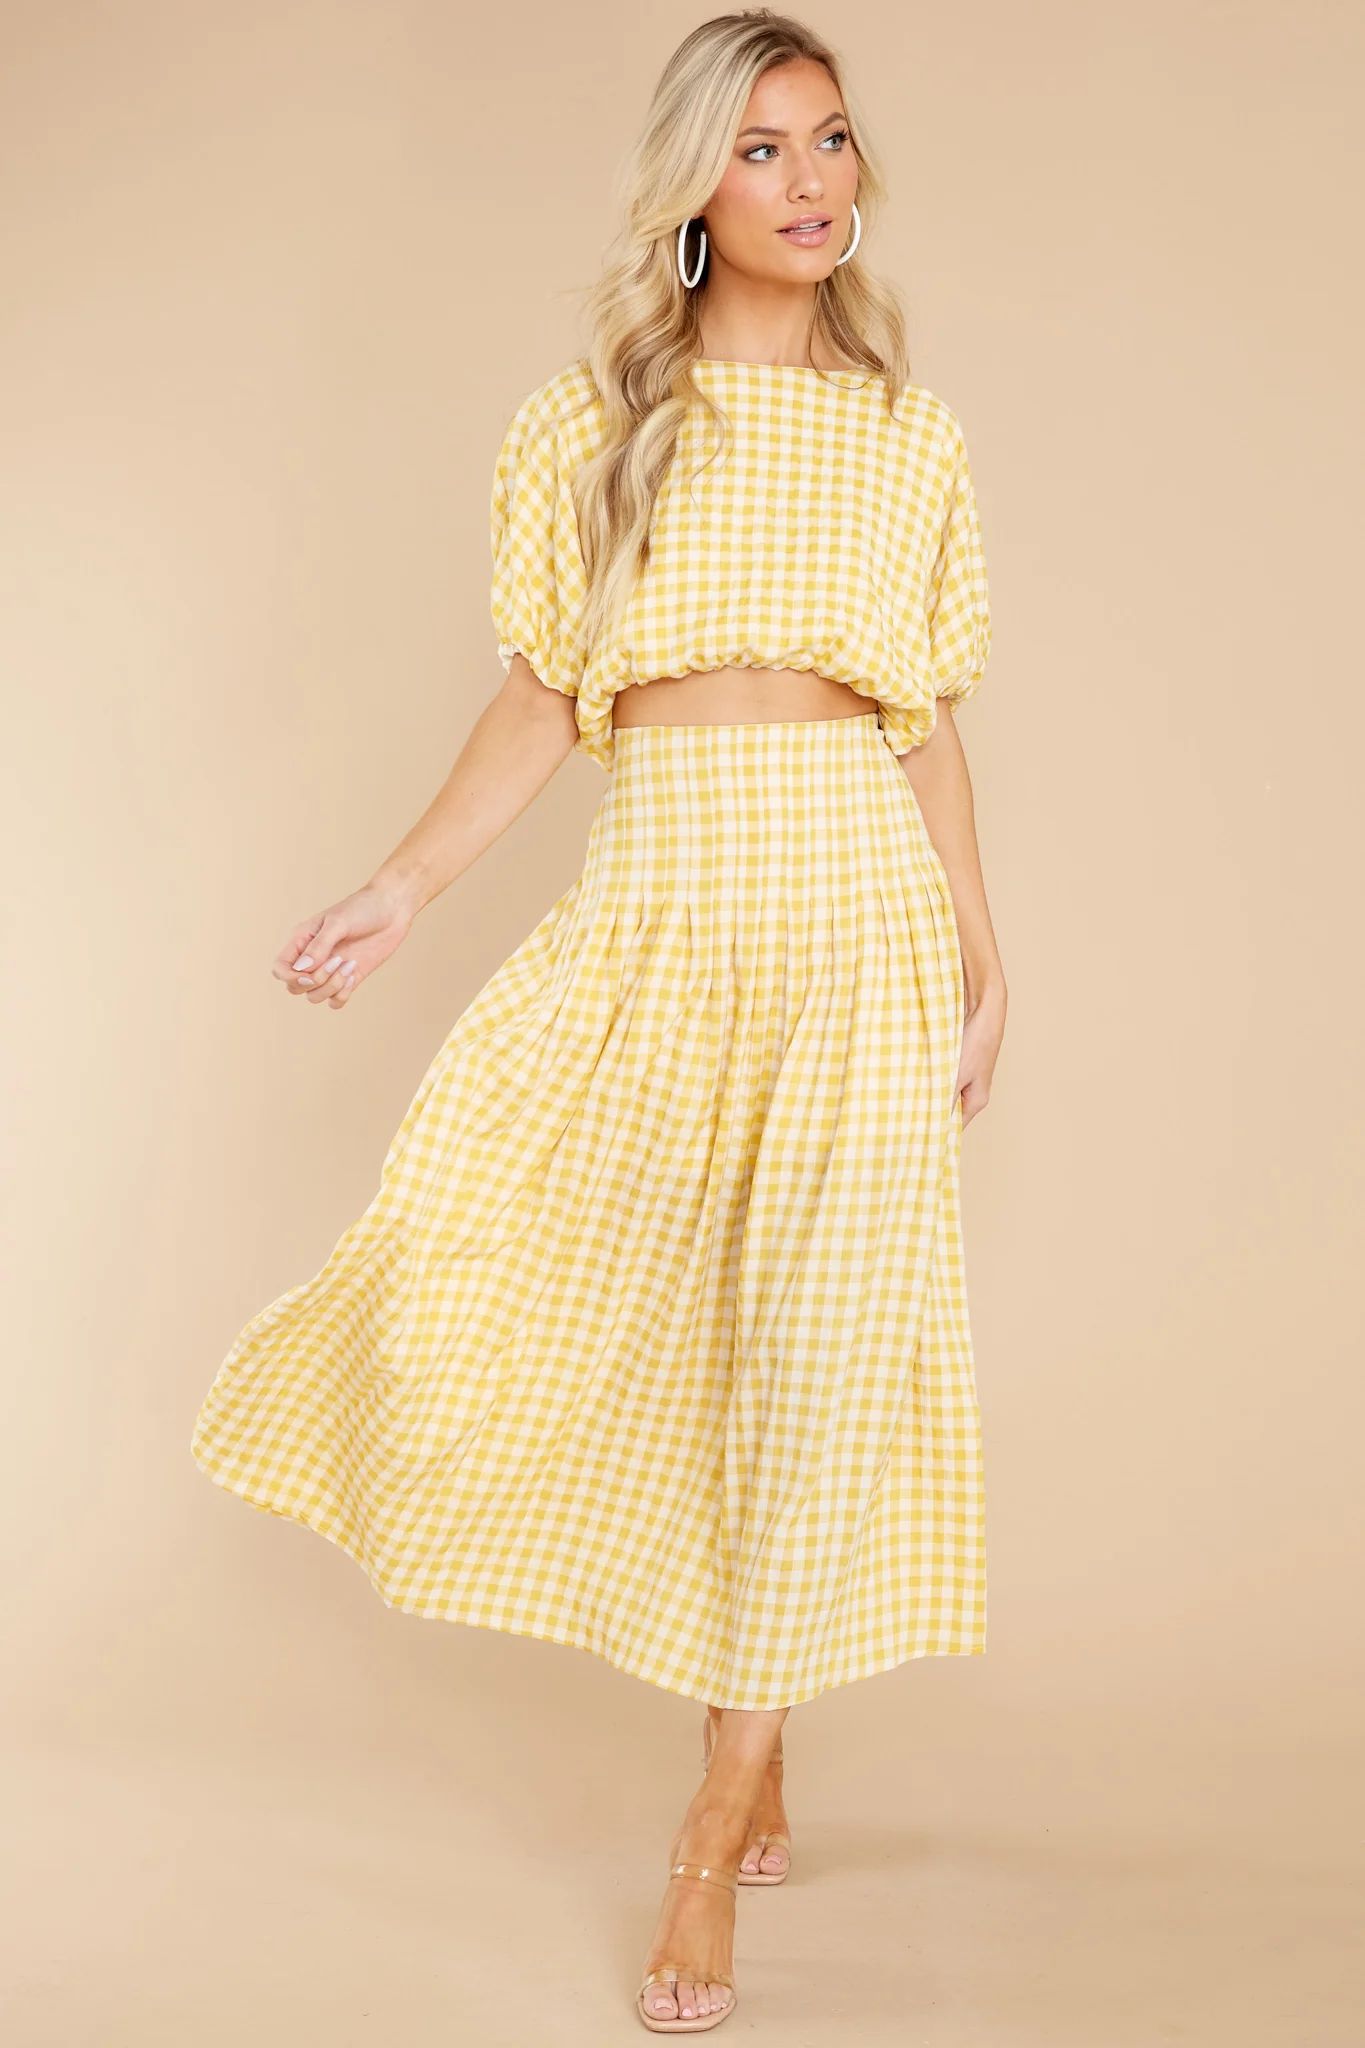 Admirable Glances Sunflower Yellow Gingham Two Piece Set | Red Dress 